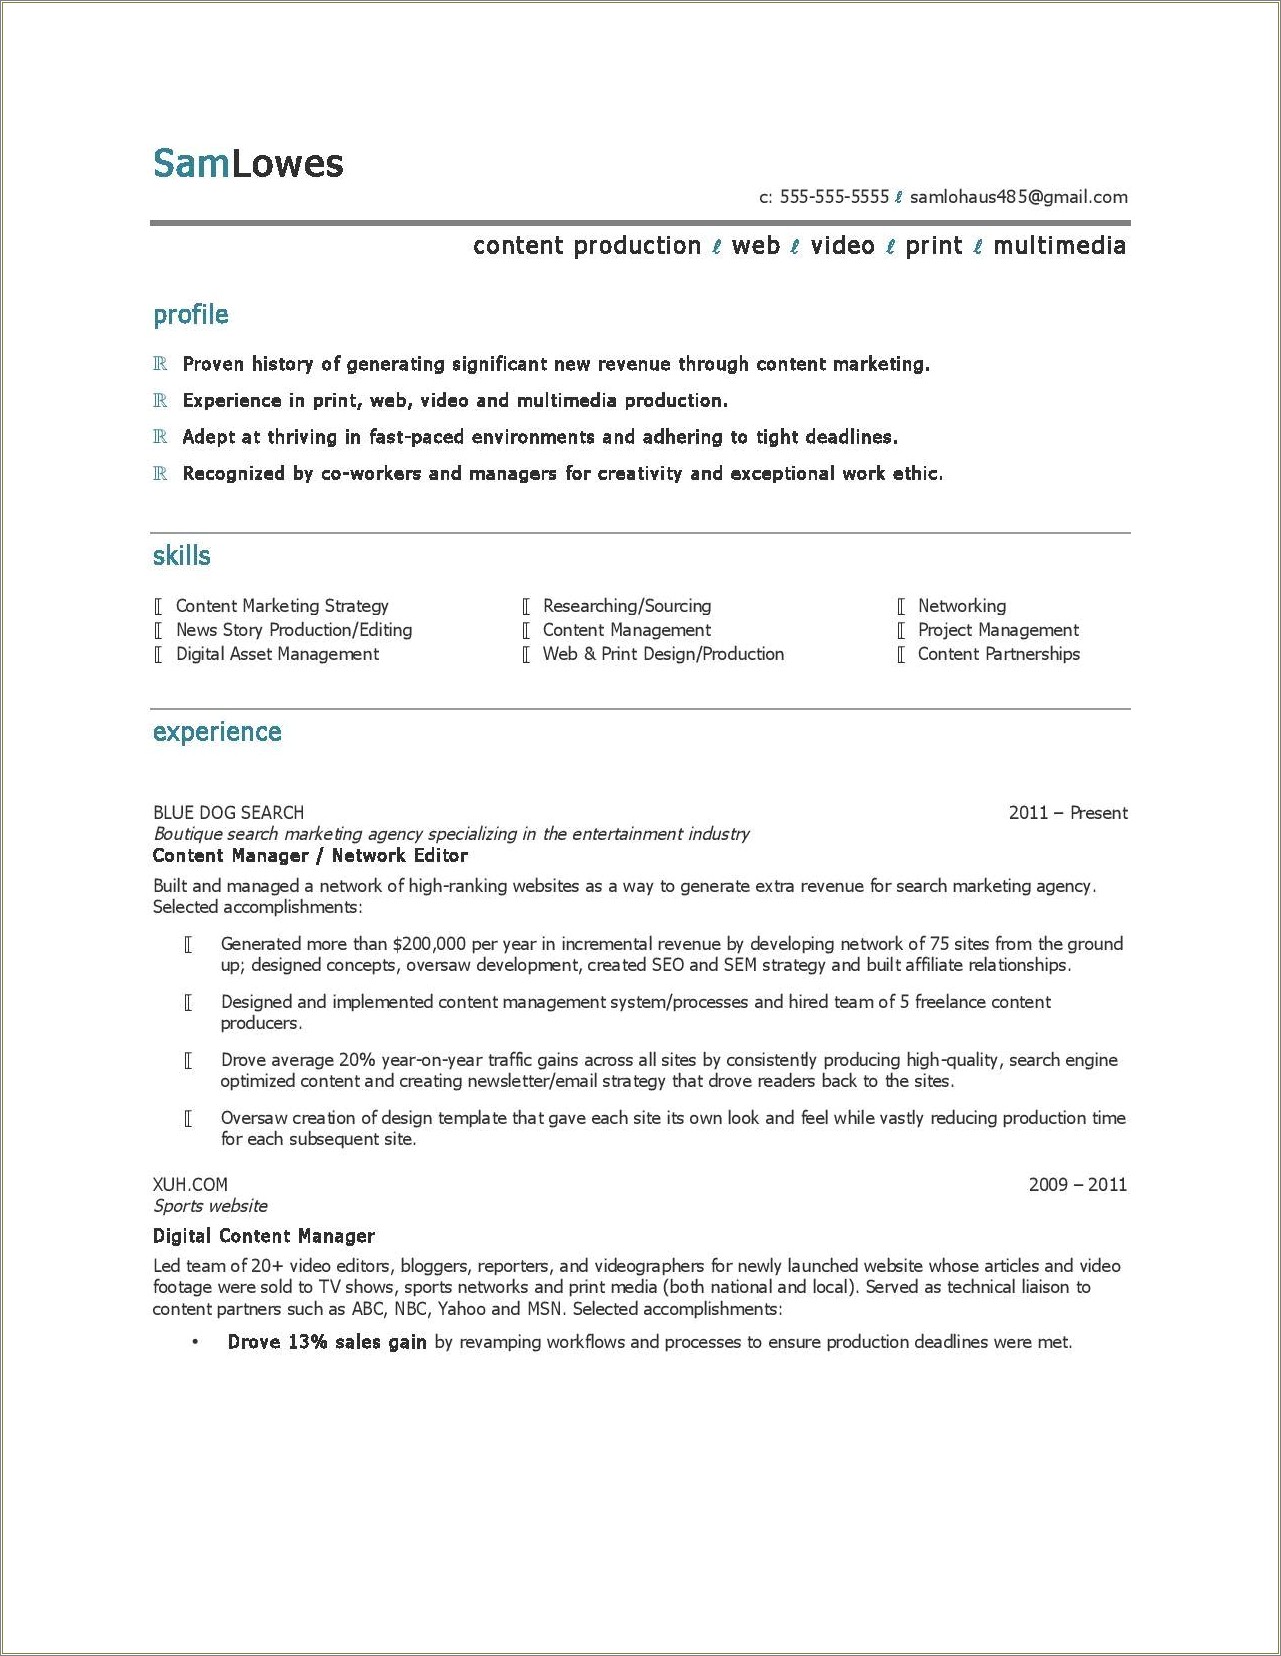 20 Years Of Experience On Resume